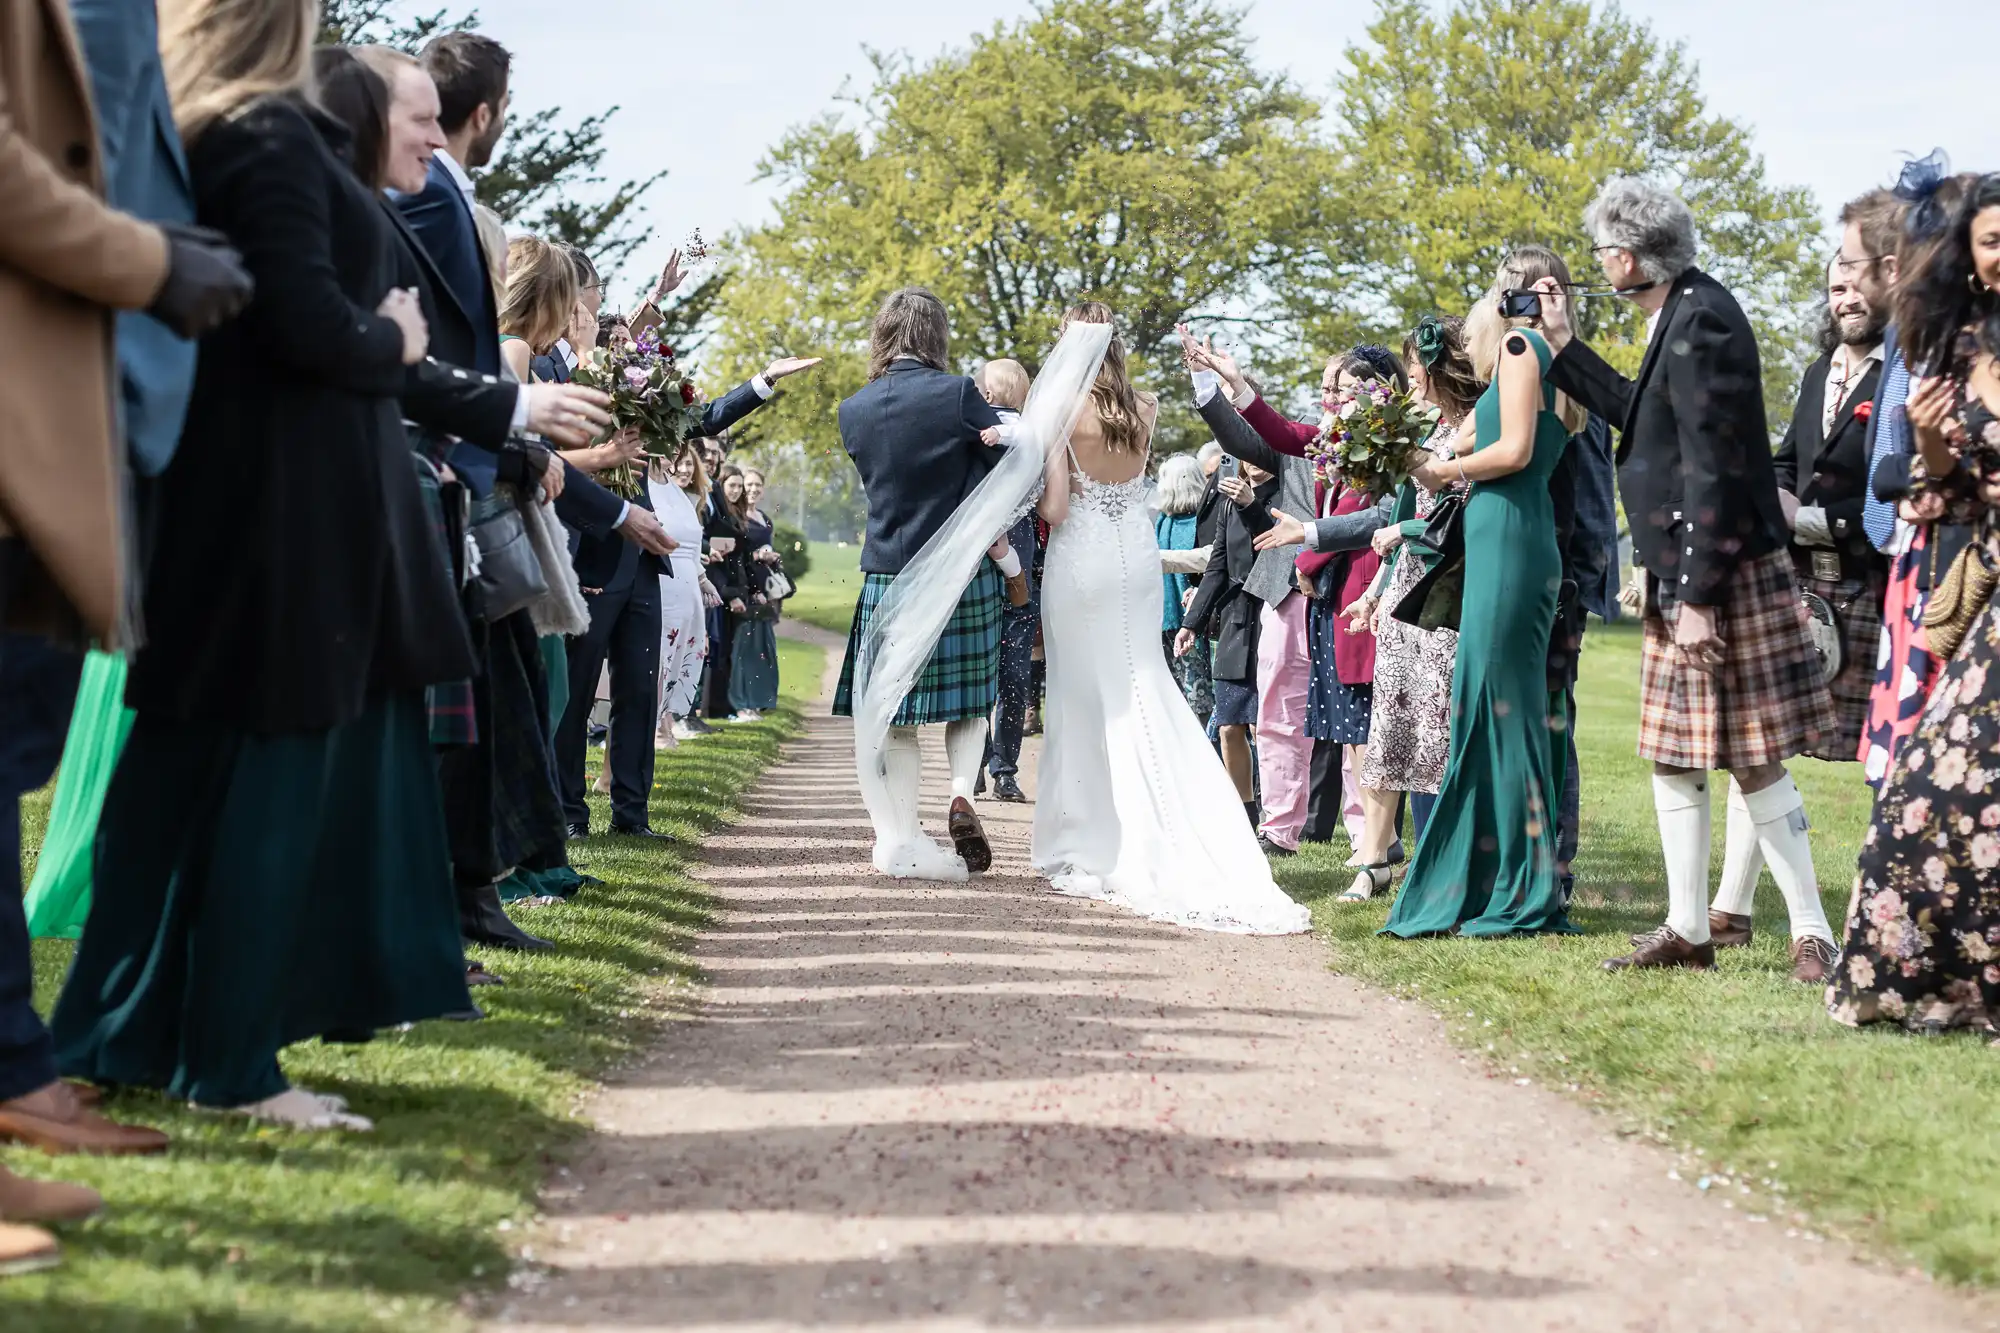 A newlywed couple walks down a path while guests, standing on both sides, applaud and take photos. The bride is in a white dress, and the groom is in a traditional kilt. Trees are in the background.